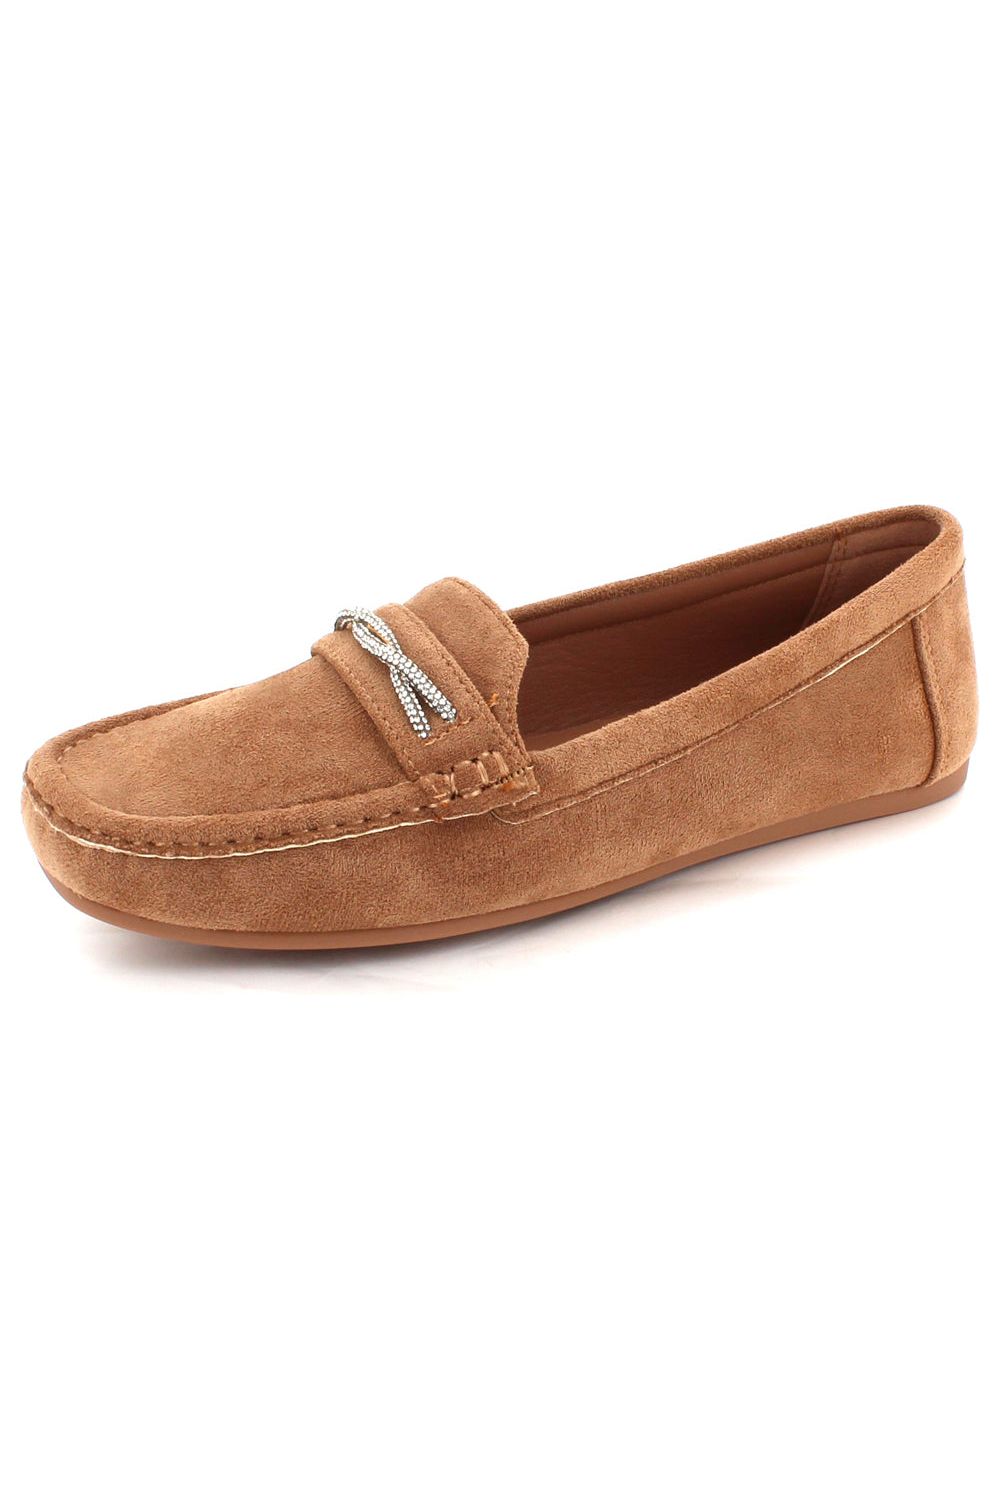 Comfort Casual Office Work Loafer Moccasins Closed Toe Flat Slip-On L8027